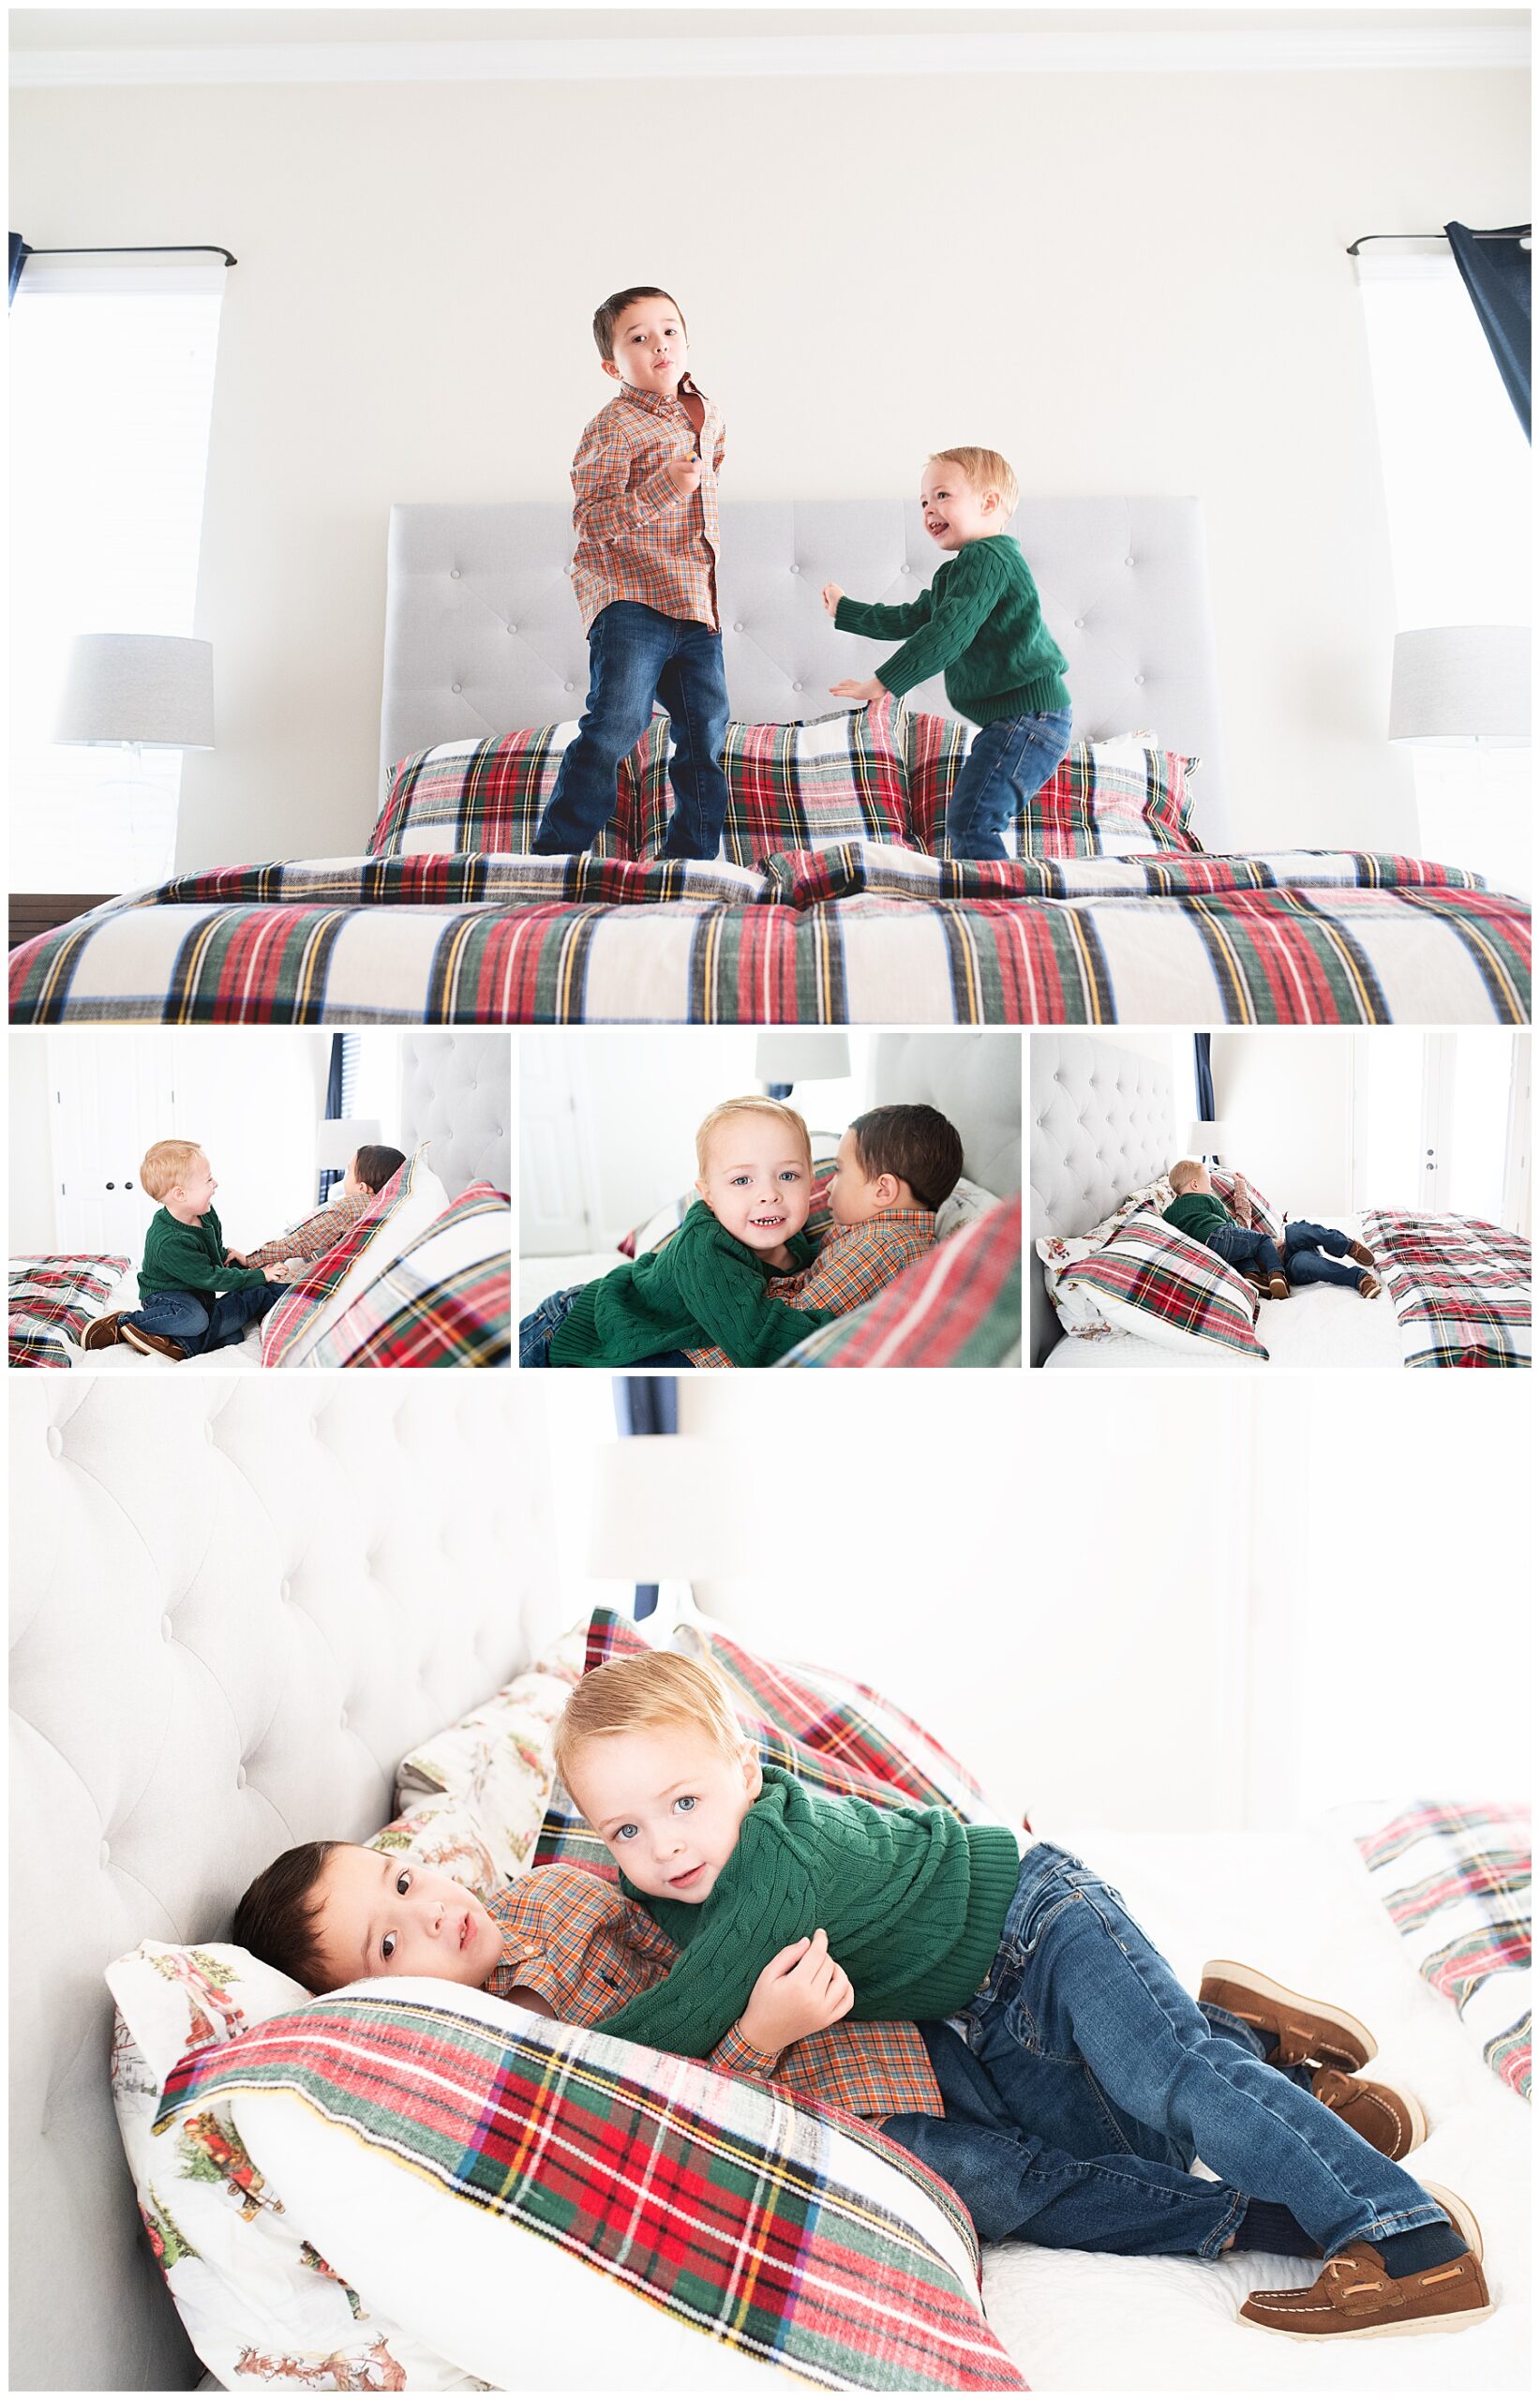 brother jumping on their parent bed